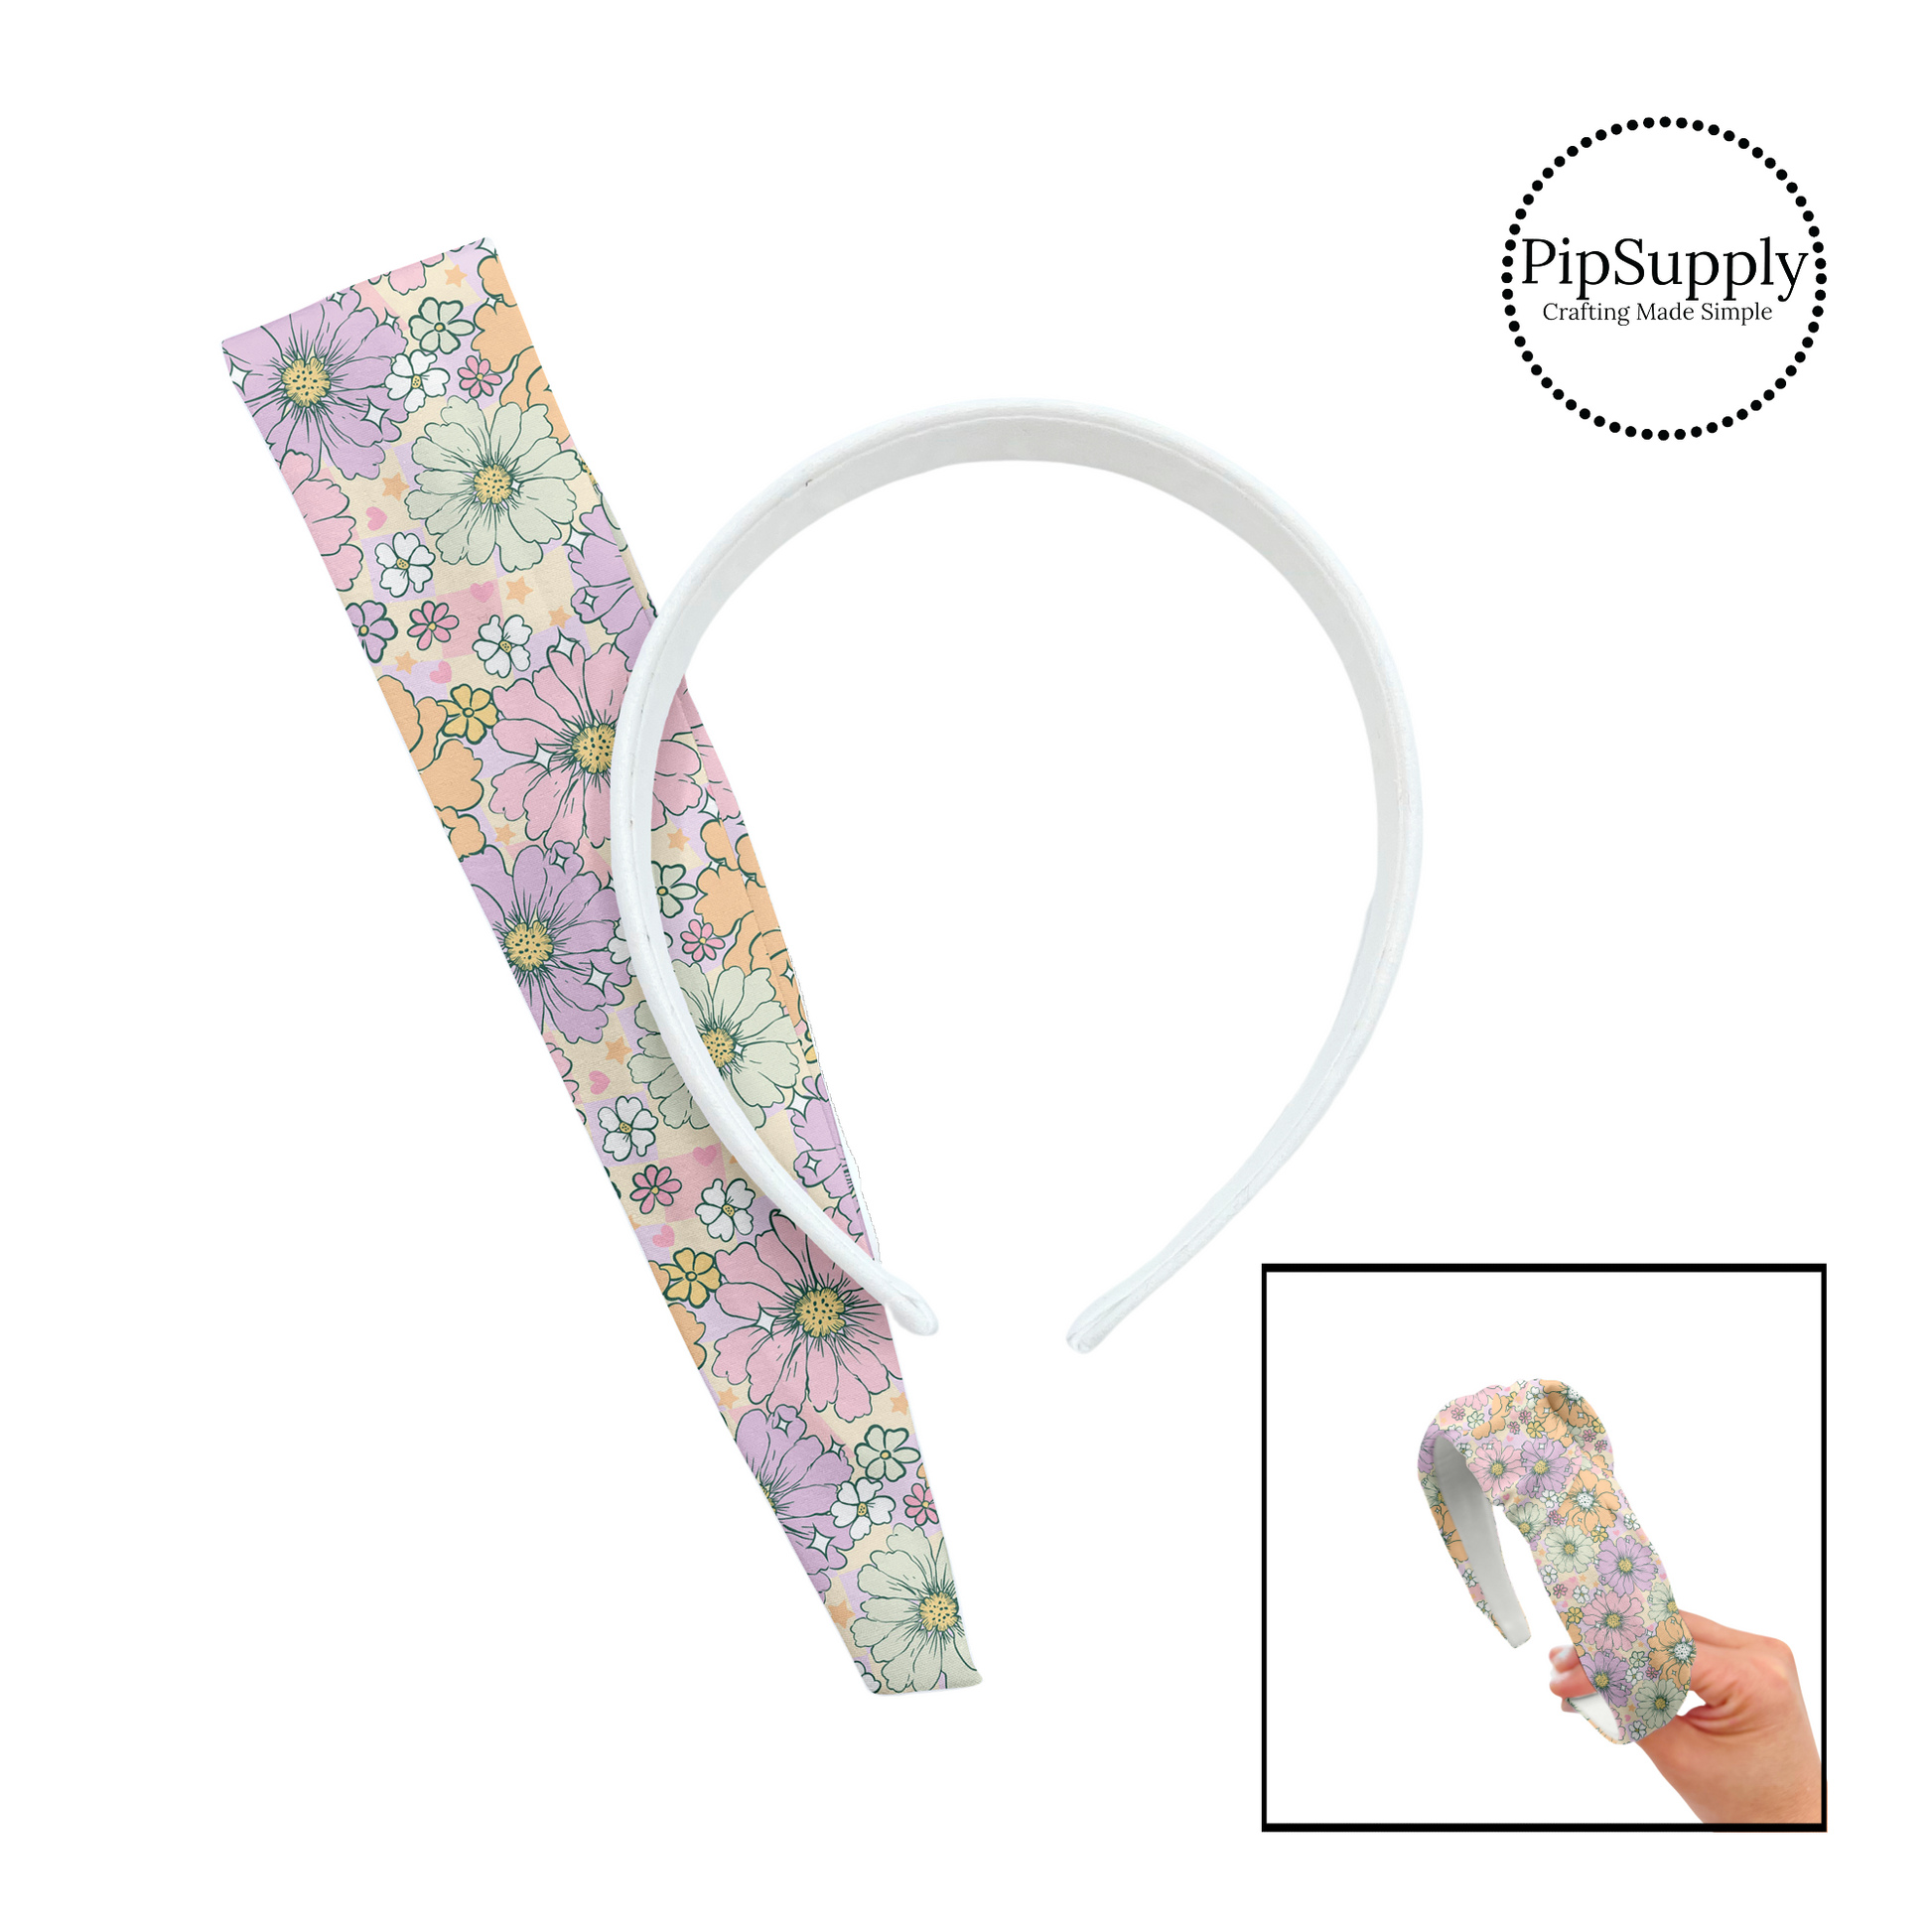 Light pink, purple, orange, and white flowers on a purple and cream checker board pattern DIY knotted headband kit. 